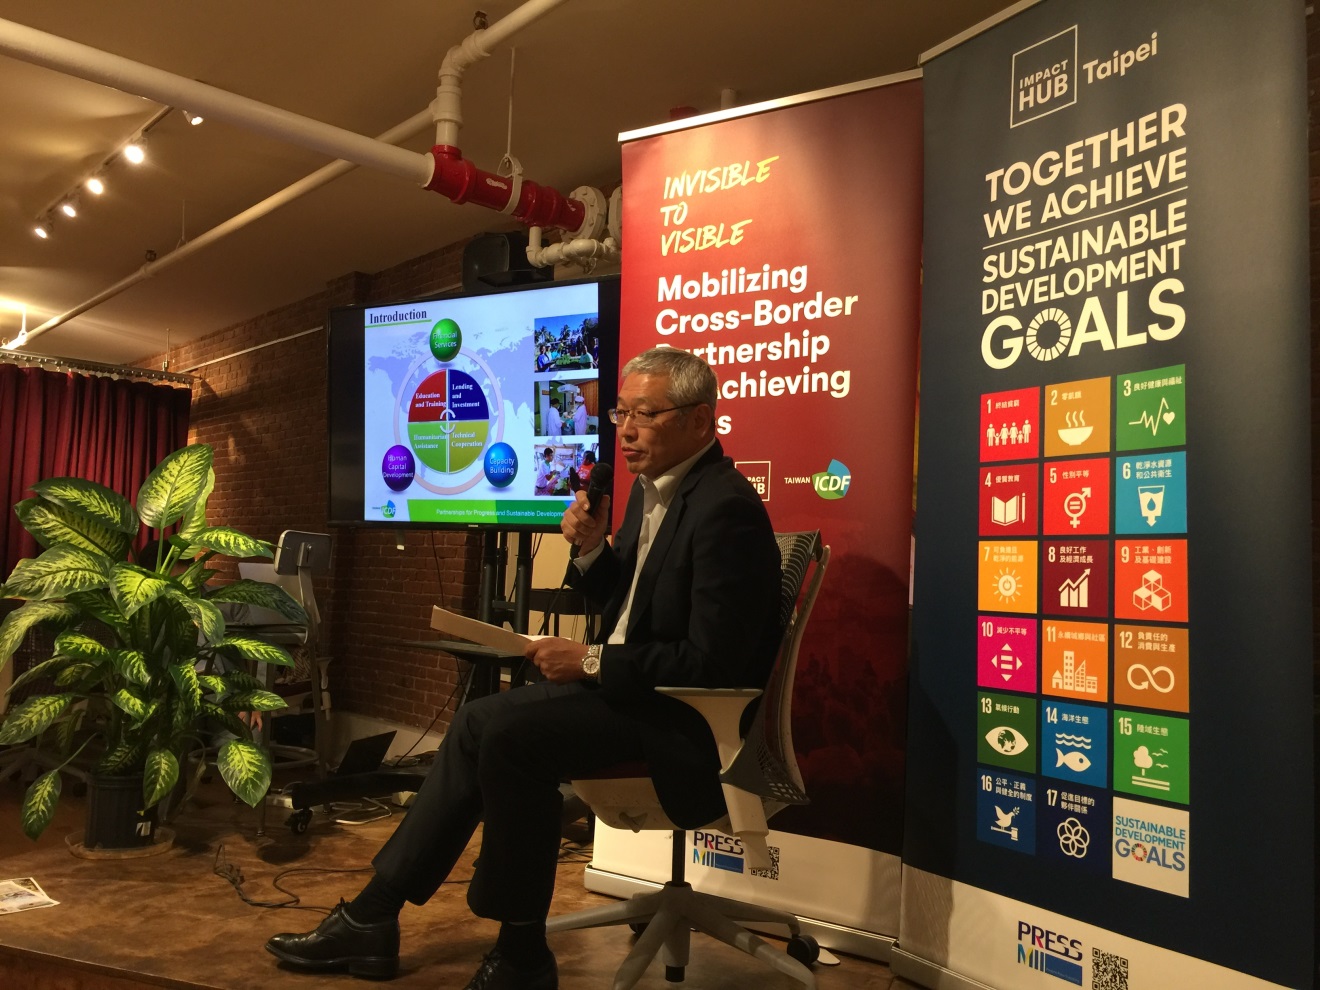 TaiwanICDF on ‘How to start small with business and innovation’ for Sustainable Development at Impact Hub NYC